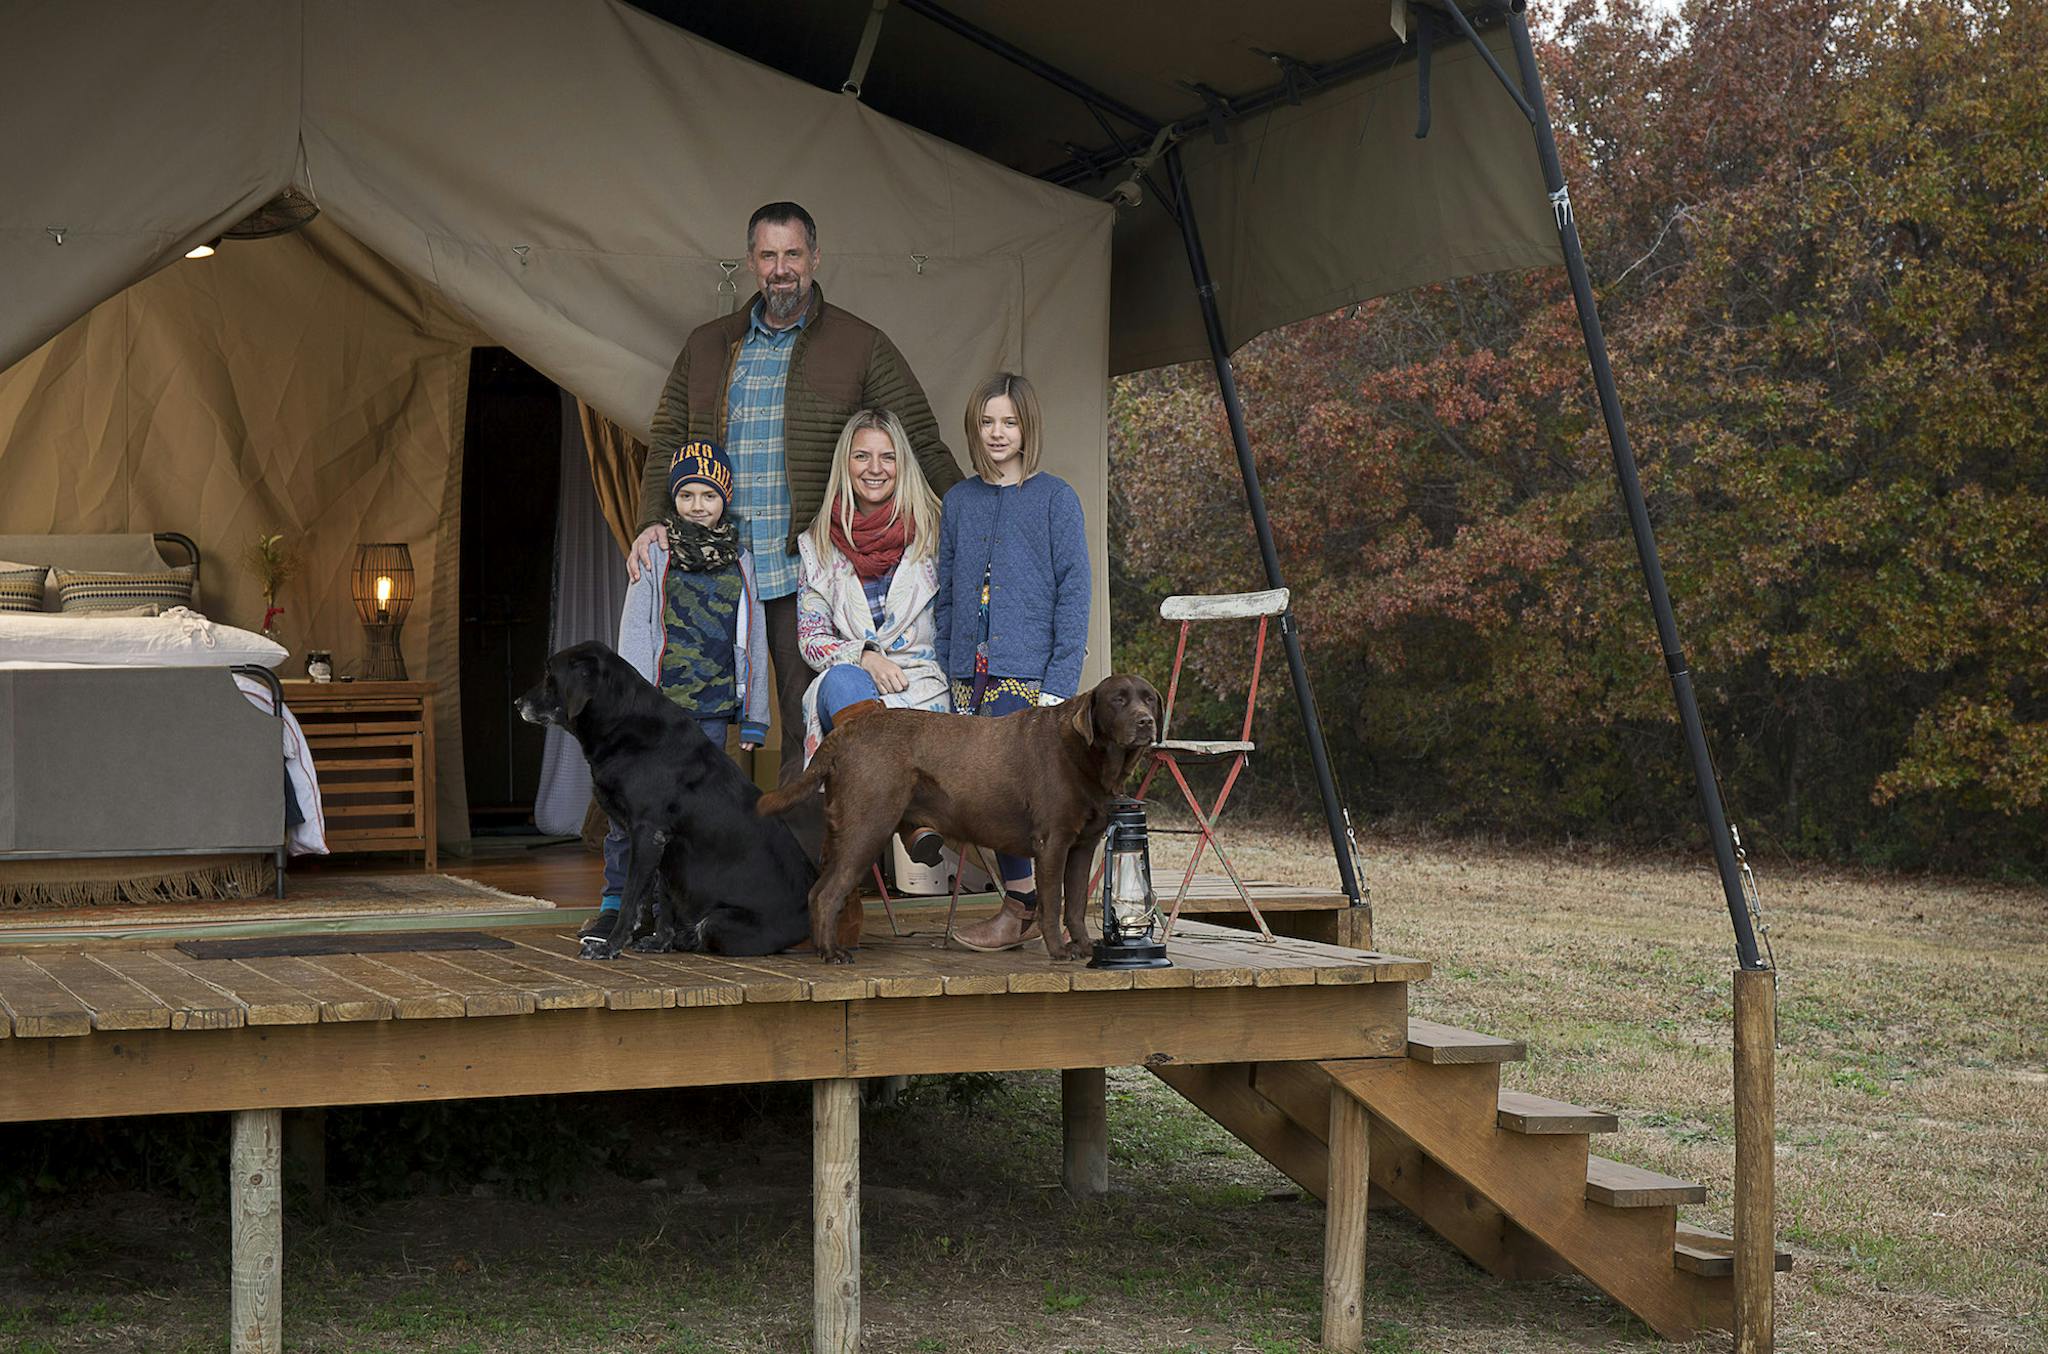 The Munson family on an elevated wooden deck outside of one of their tents.